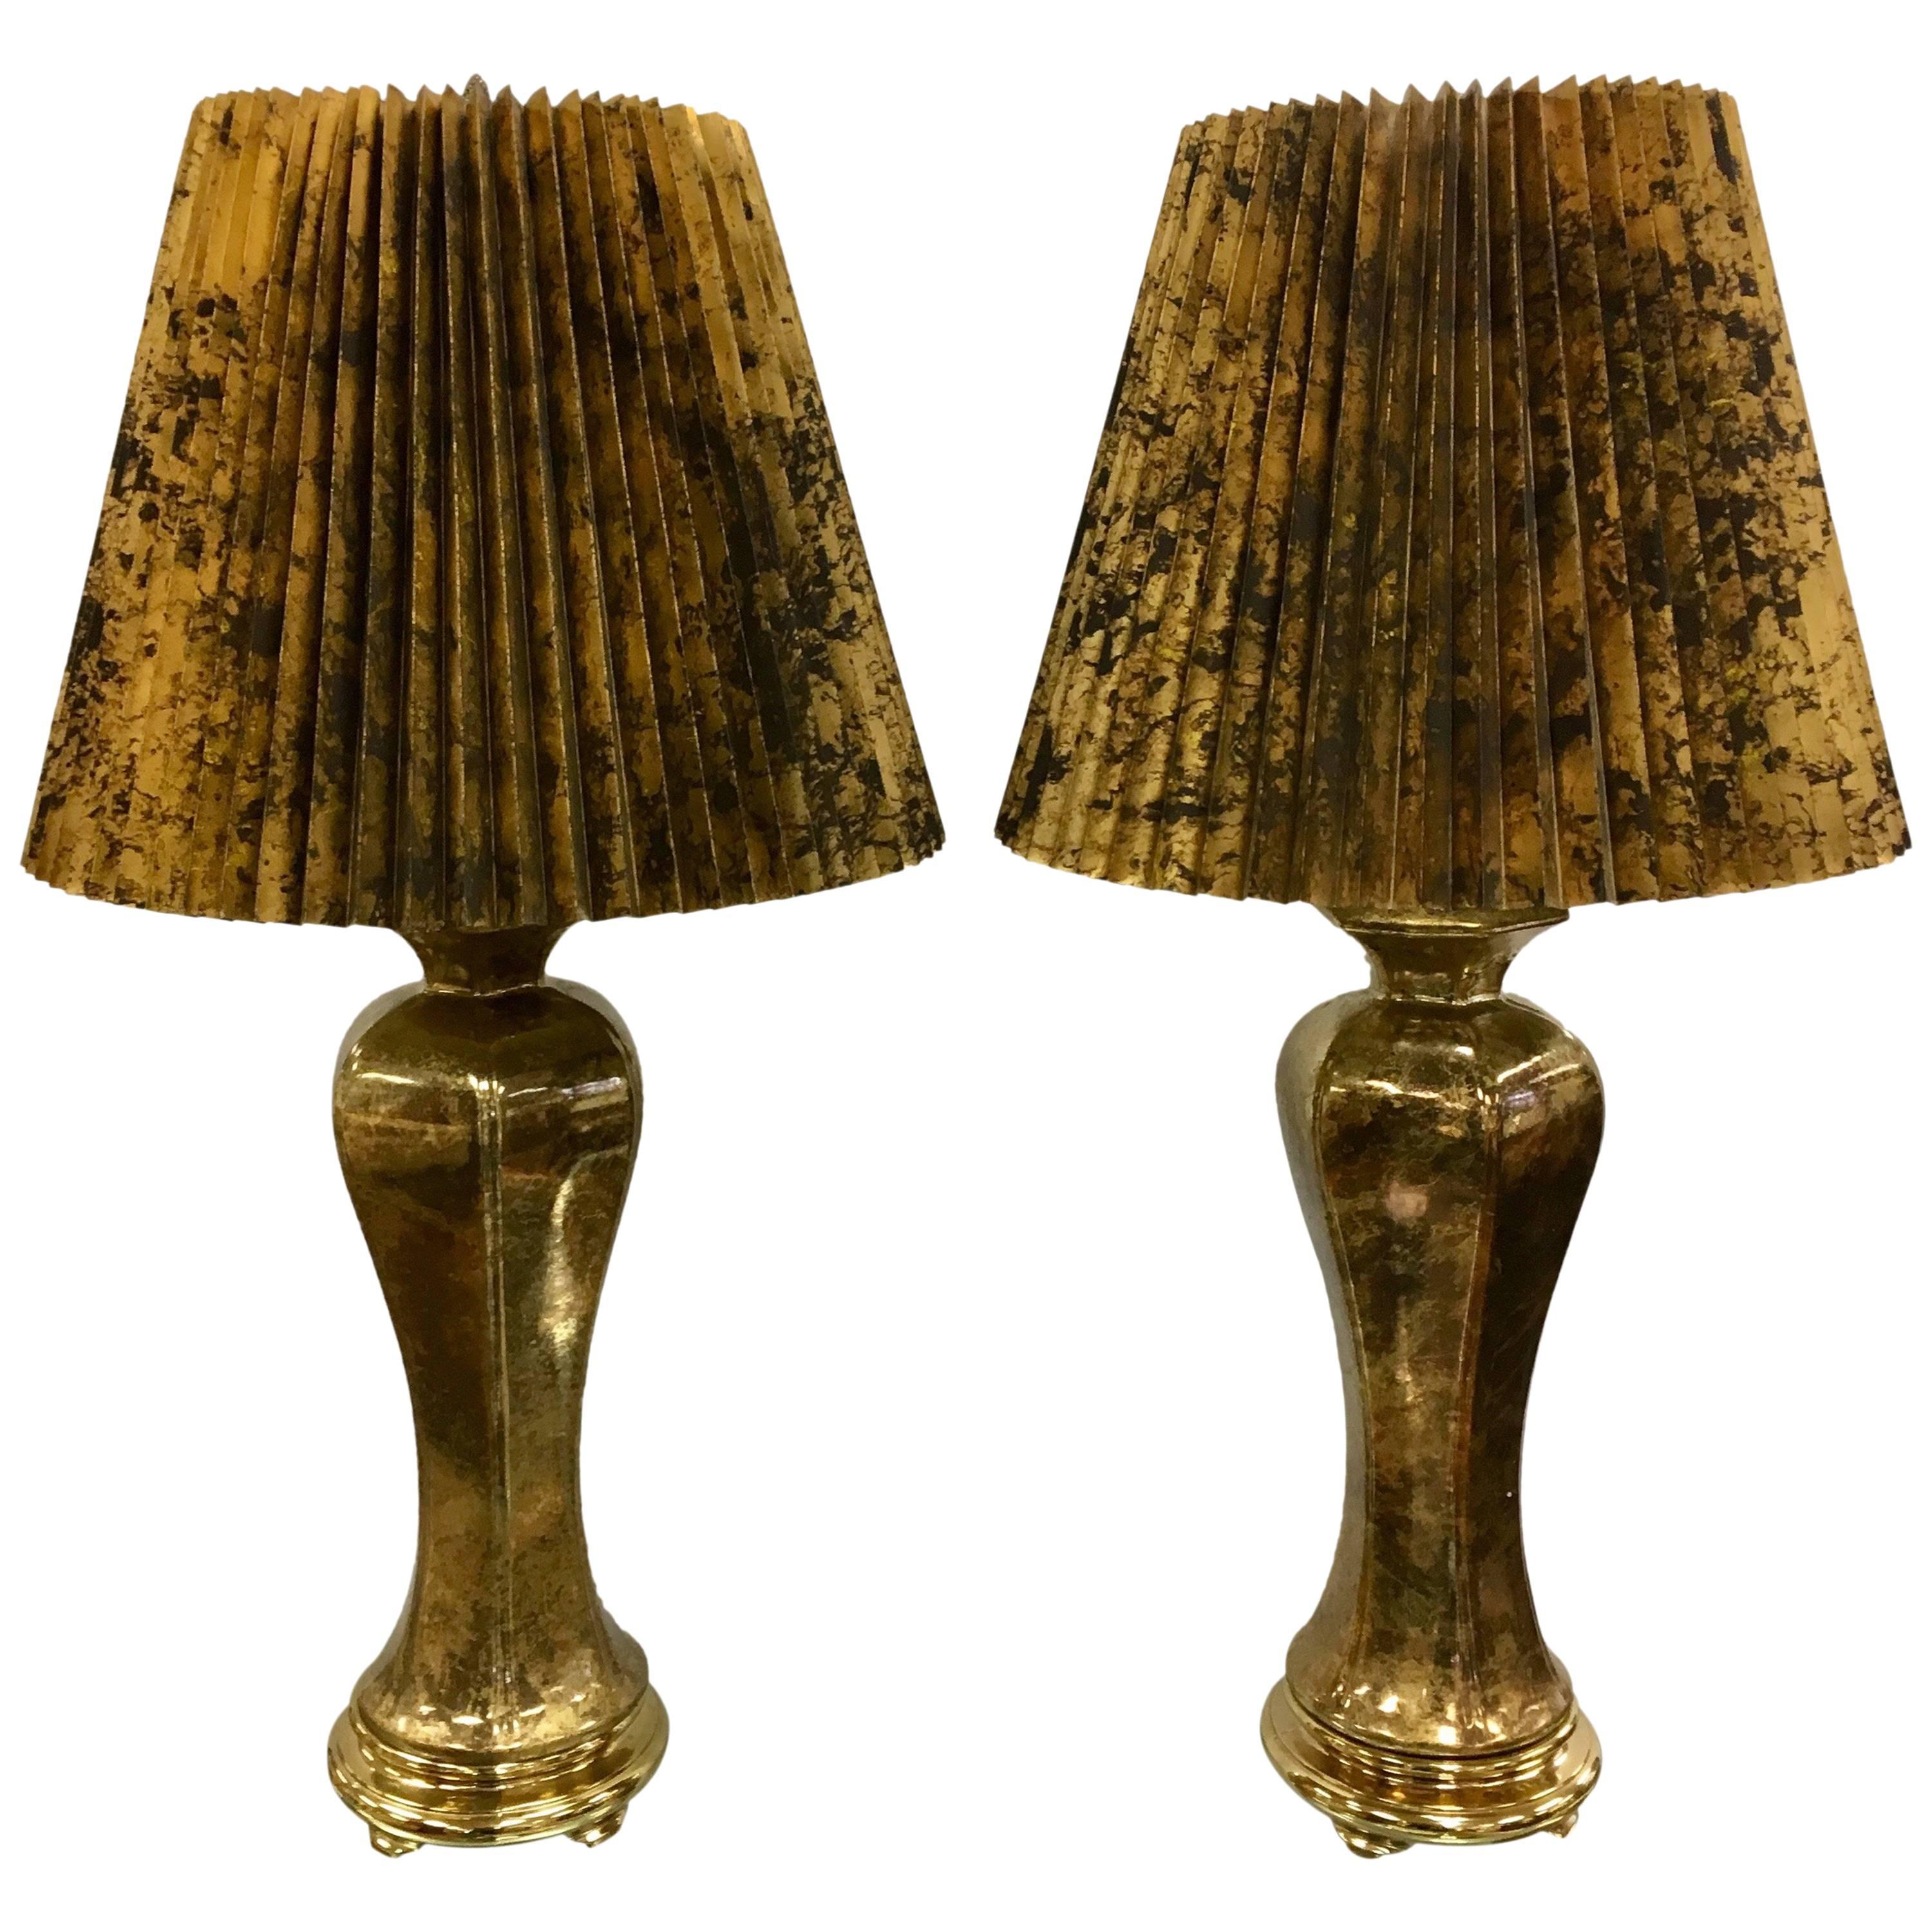 Pair of Monumental Hollywood Regency Glazed Gold Urn Form Table Lamps